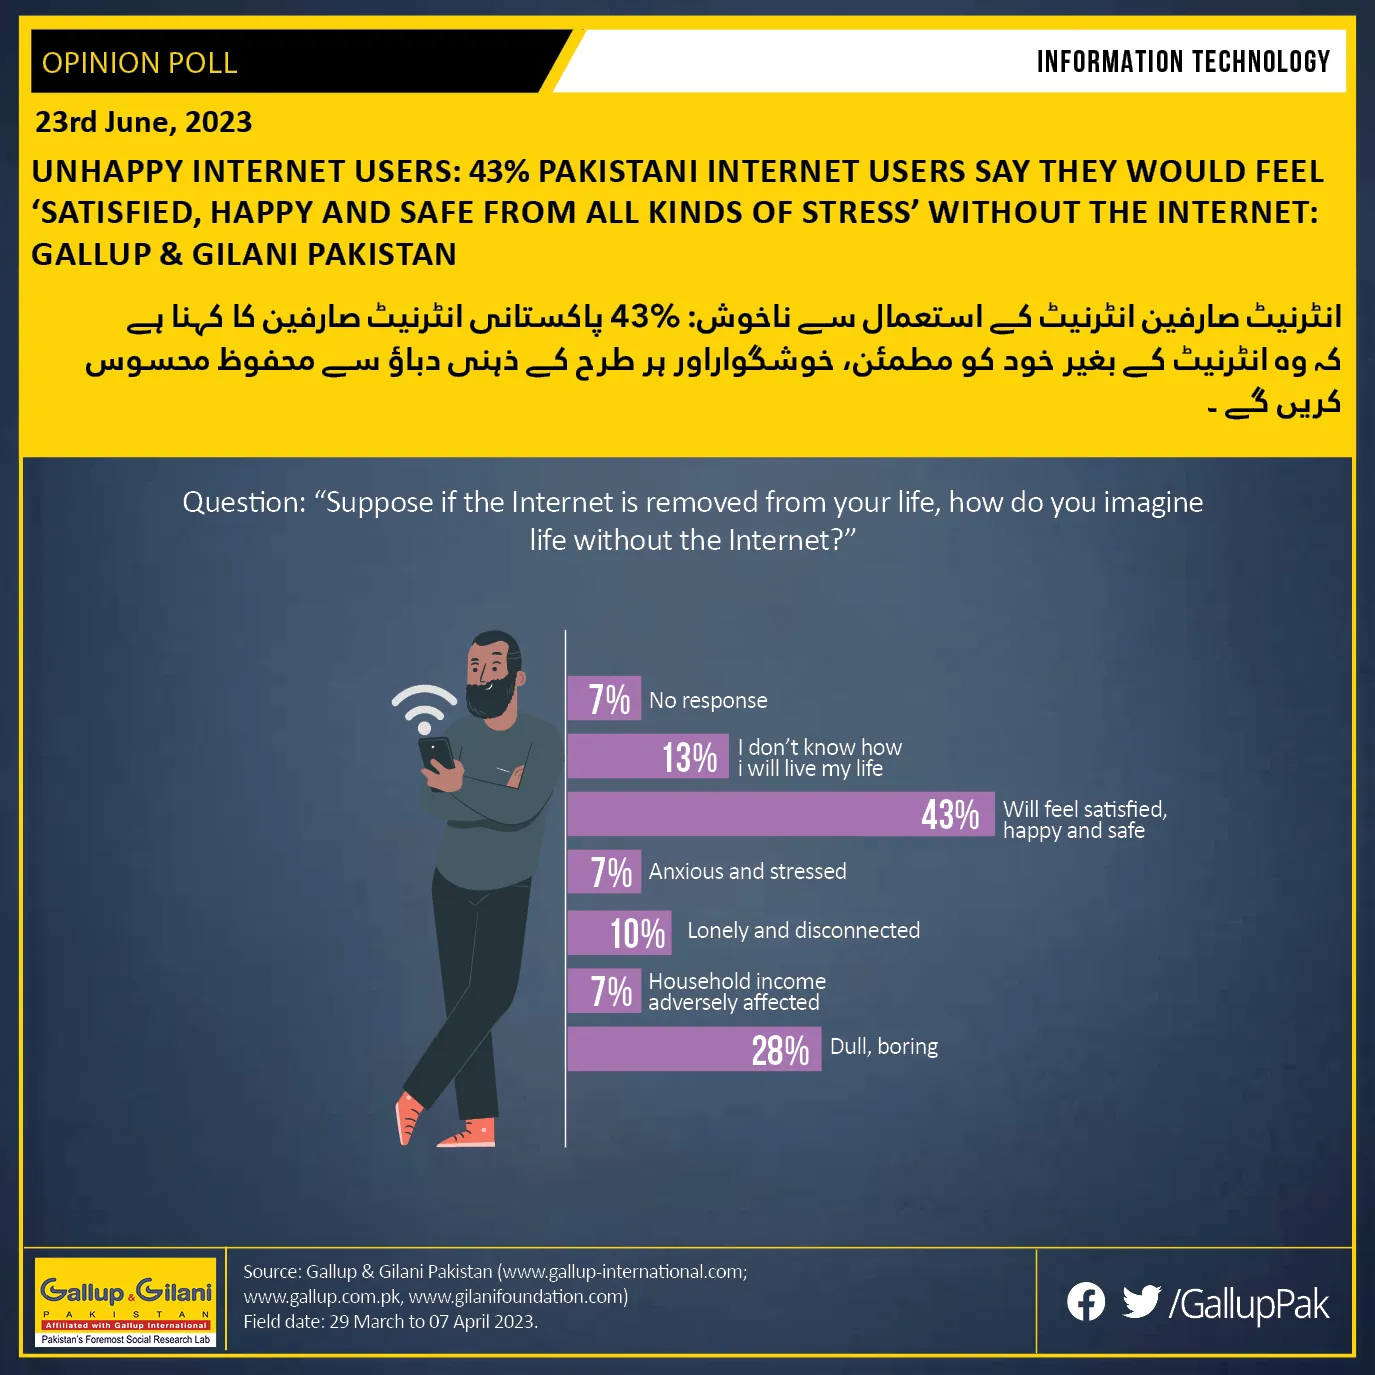 Unhappy Internet Users: 43% Pakistani internet users say they would feel ‘satisfied, happy and safe from all kinds of stress’ without the internet: Gallup & Gilani Pakistan